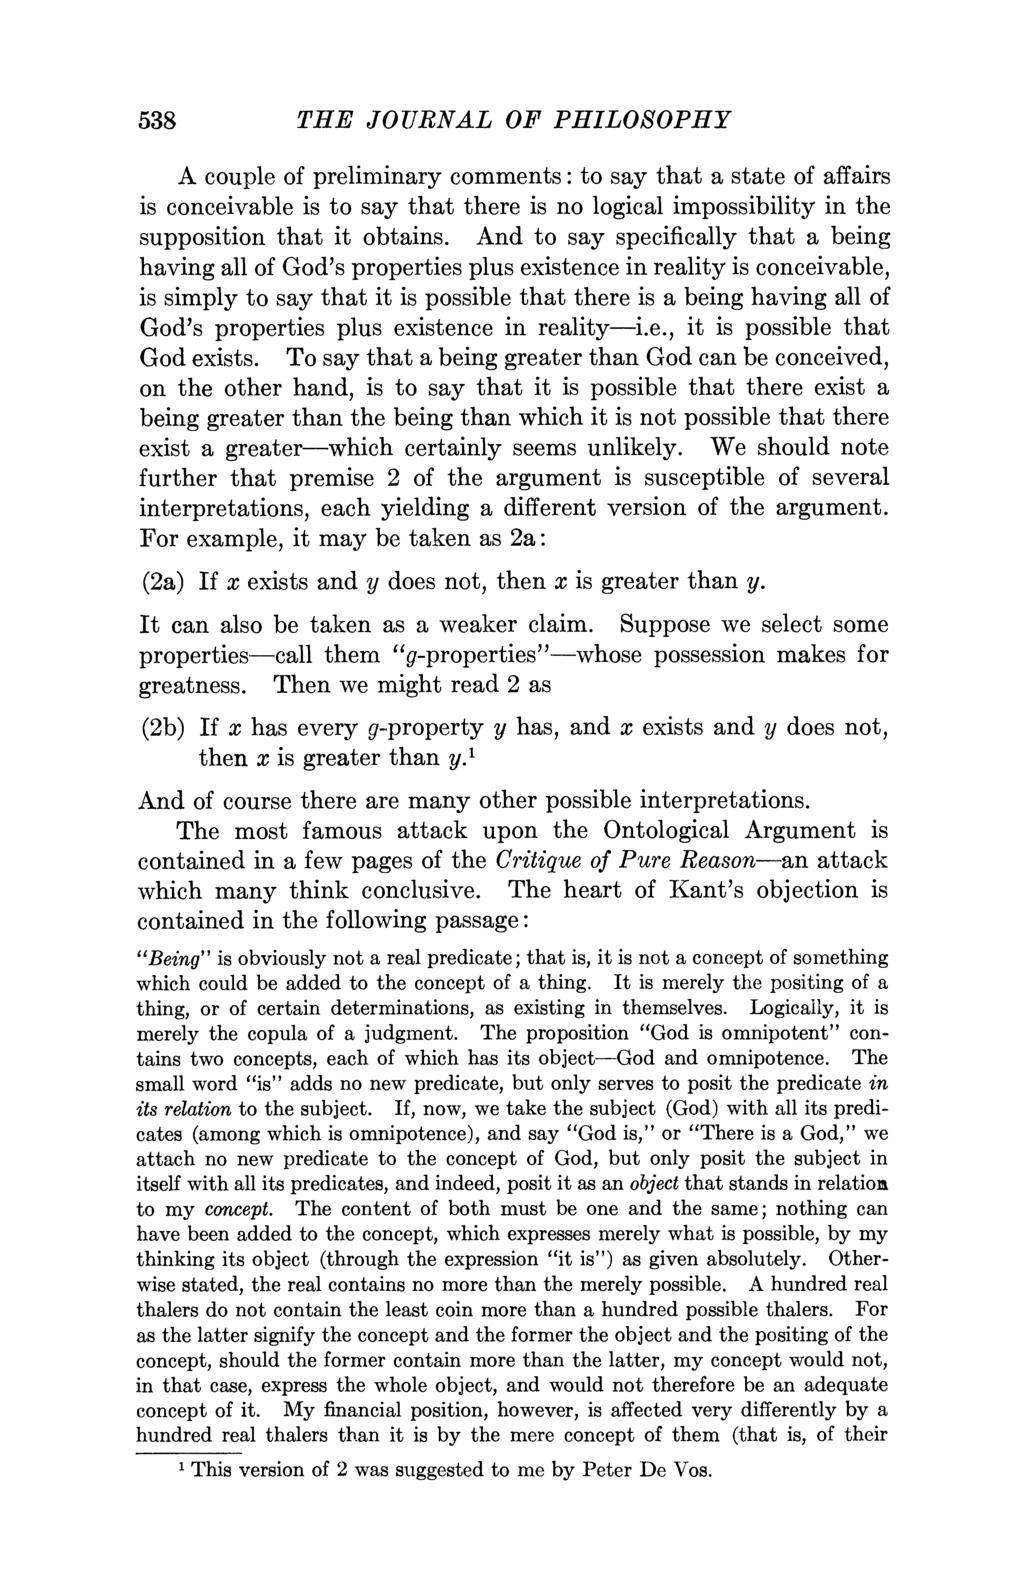 538 THE JOURNAL OF PHILOSOPHY A couple of preliminary comments: to say that a state of affairs is conceivable is to say that there is no logical impossibility in the supposition that it obtains.